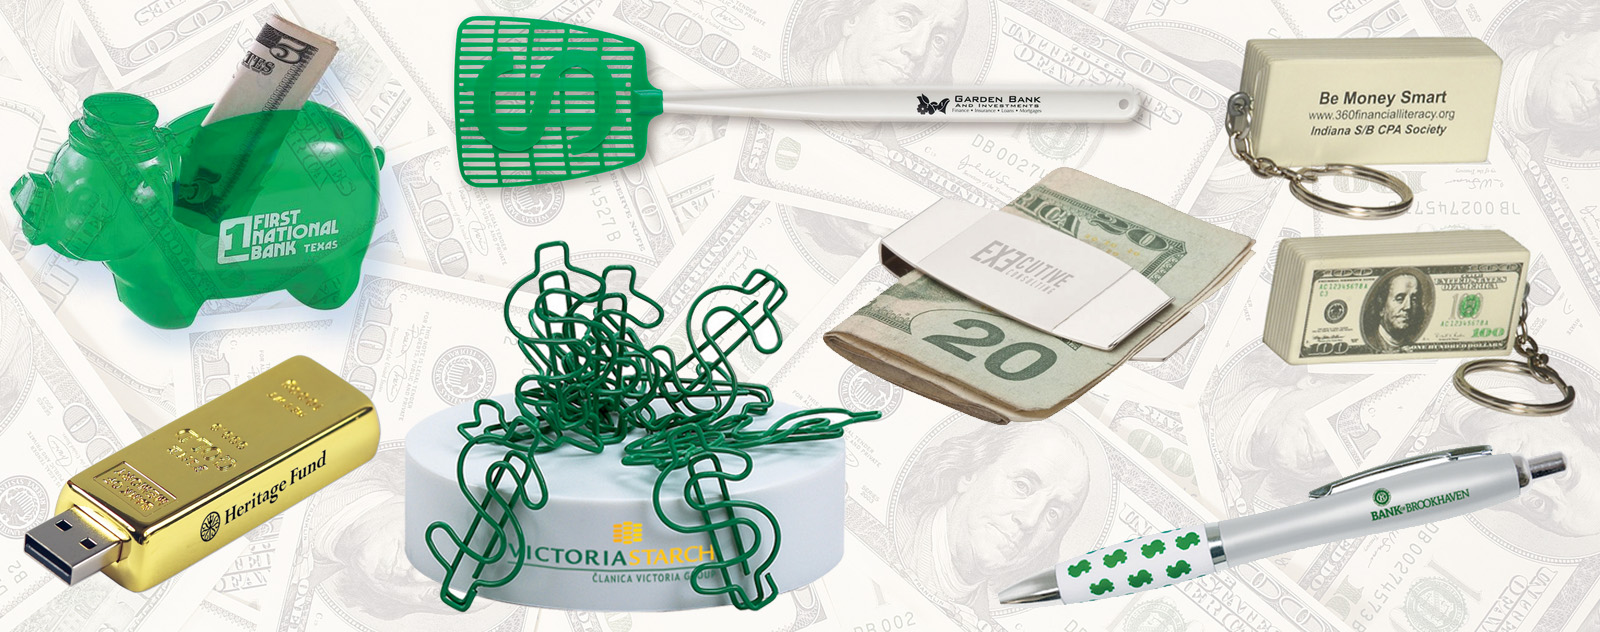 How Cost Effective are Promotional Products?